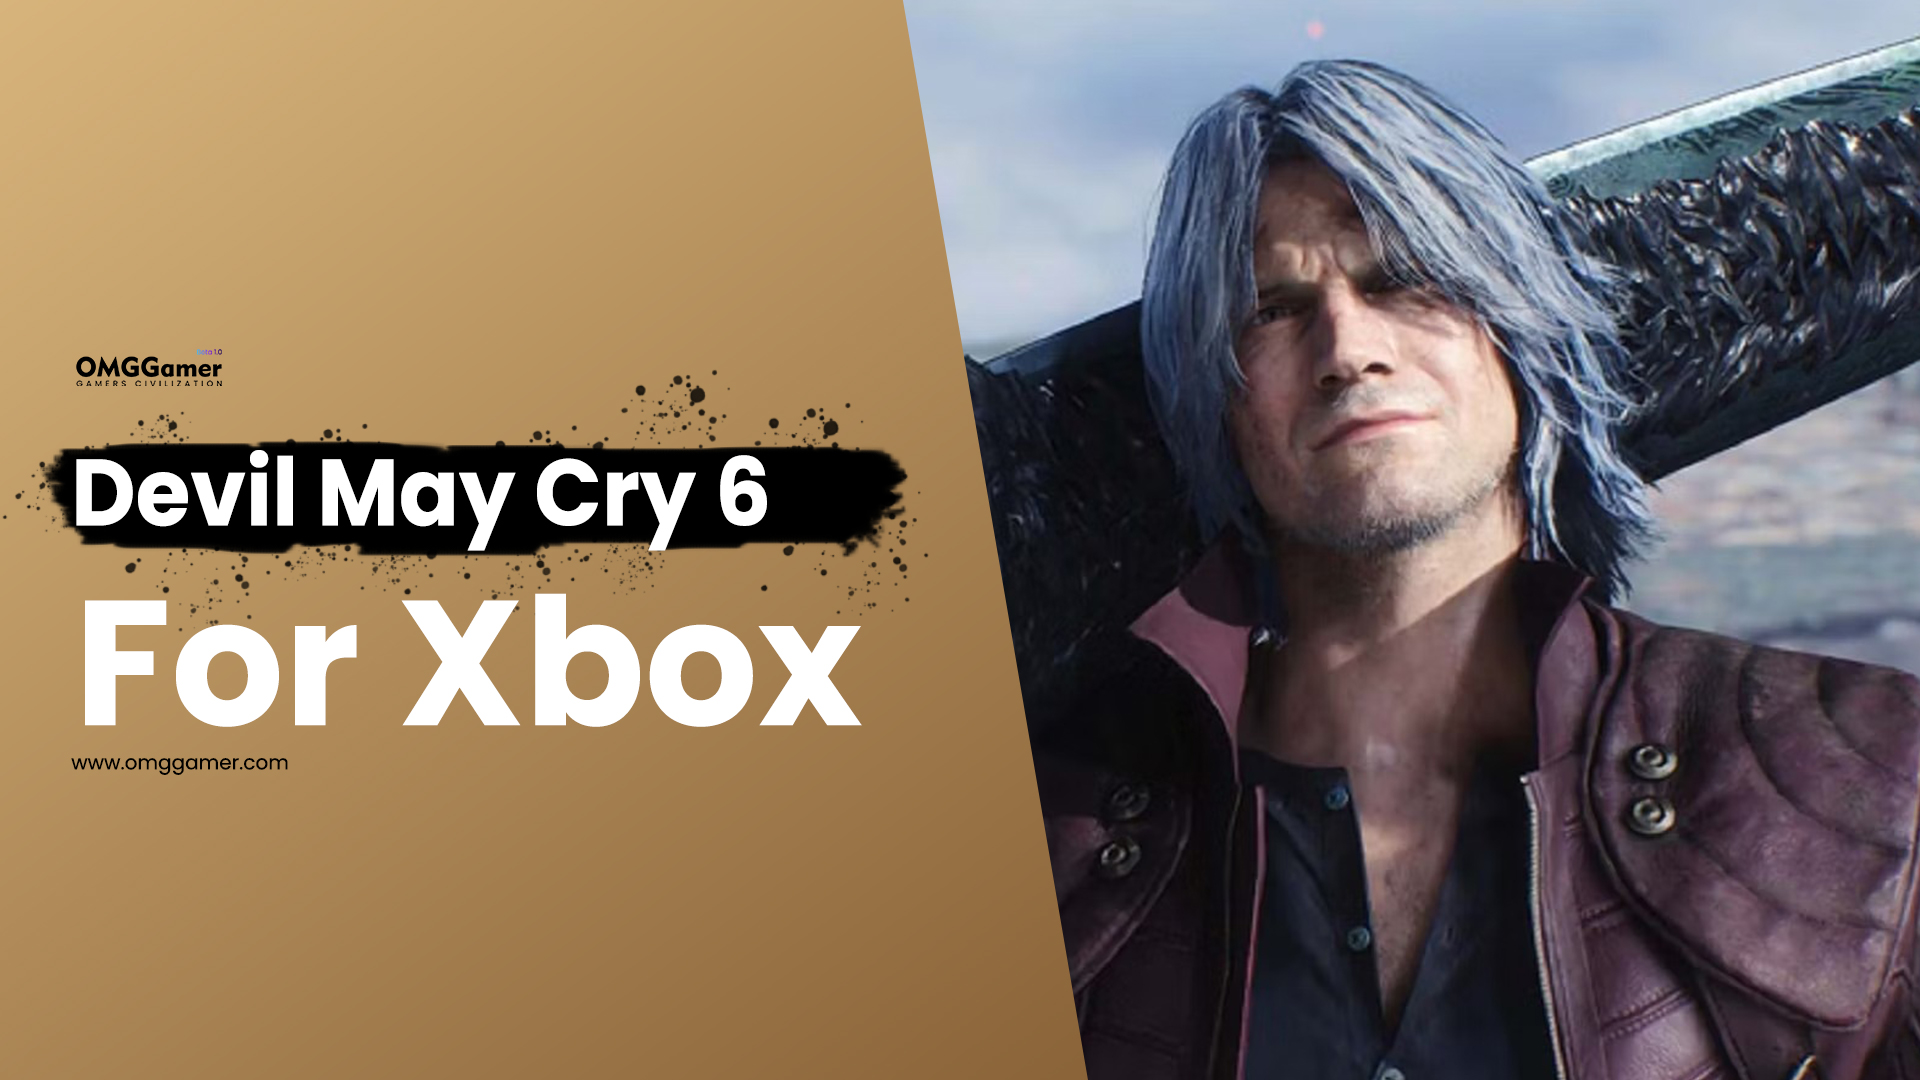 Devil May Cry 6 for Xbox